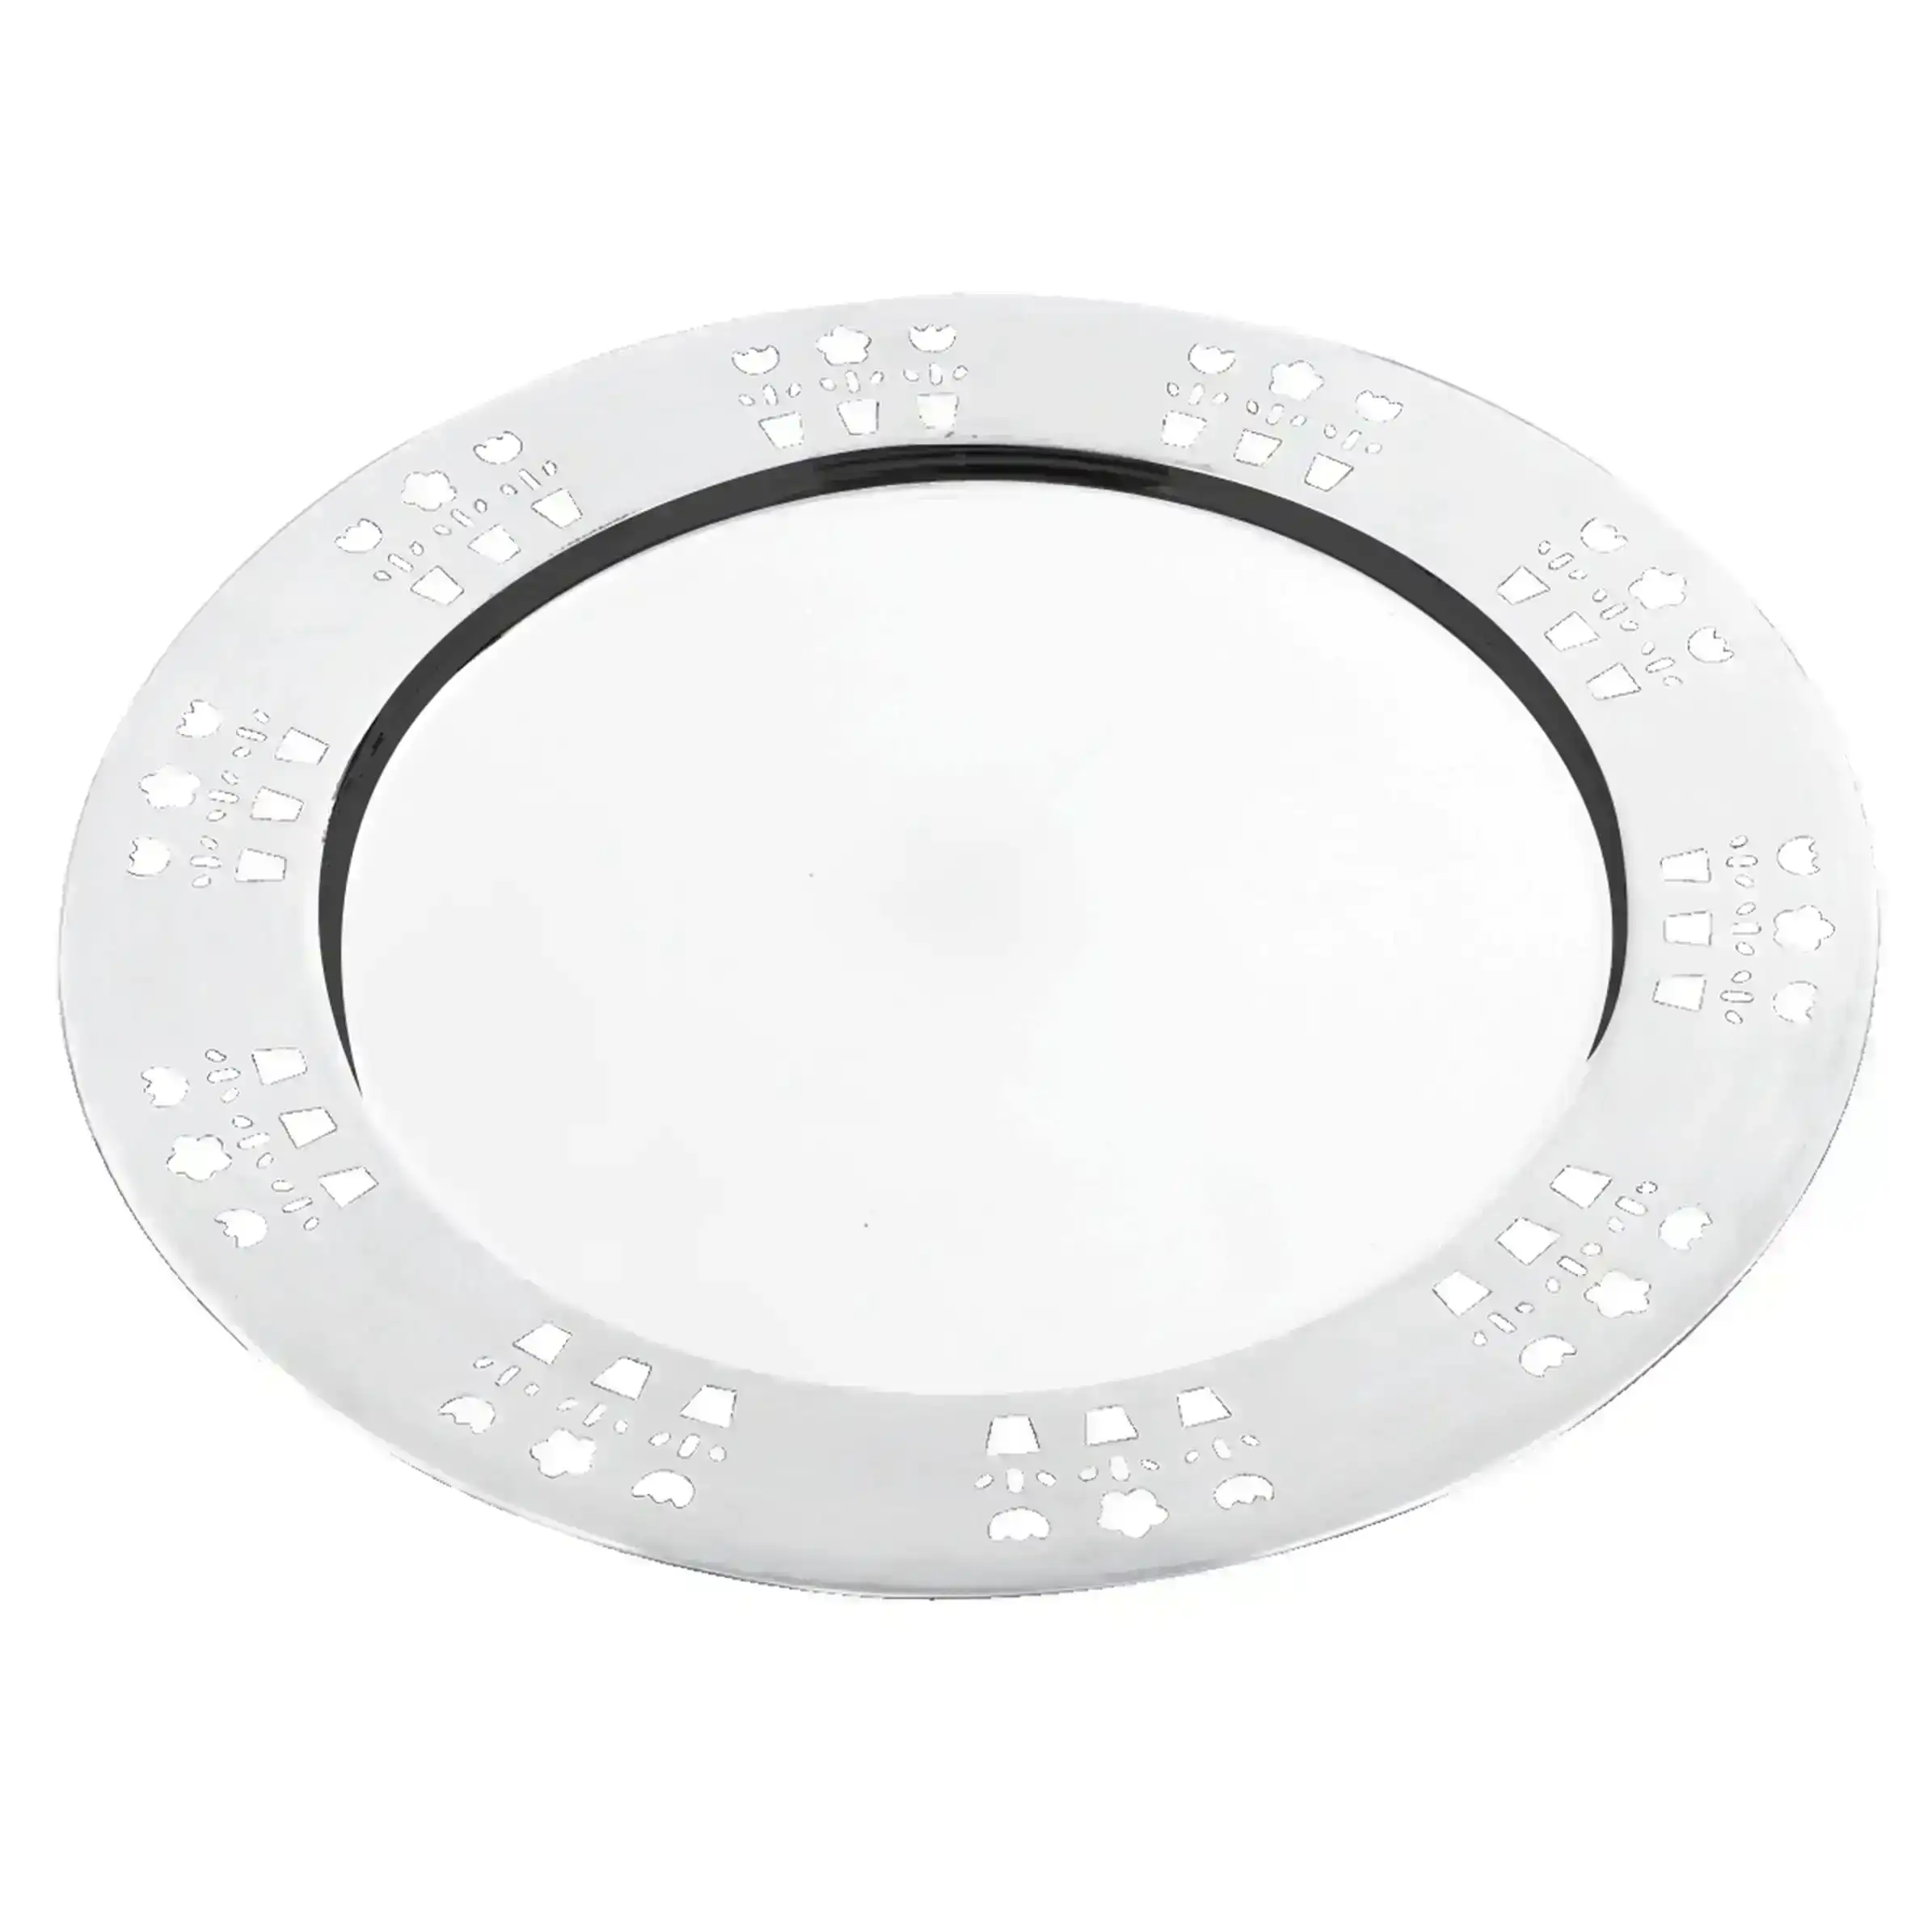 Tramontina Stainless Steel Service Plate 31 cm